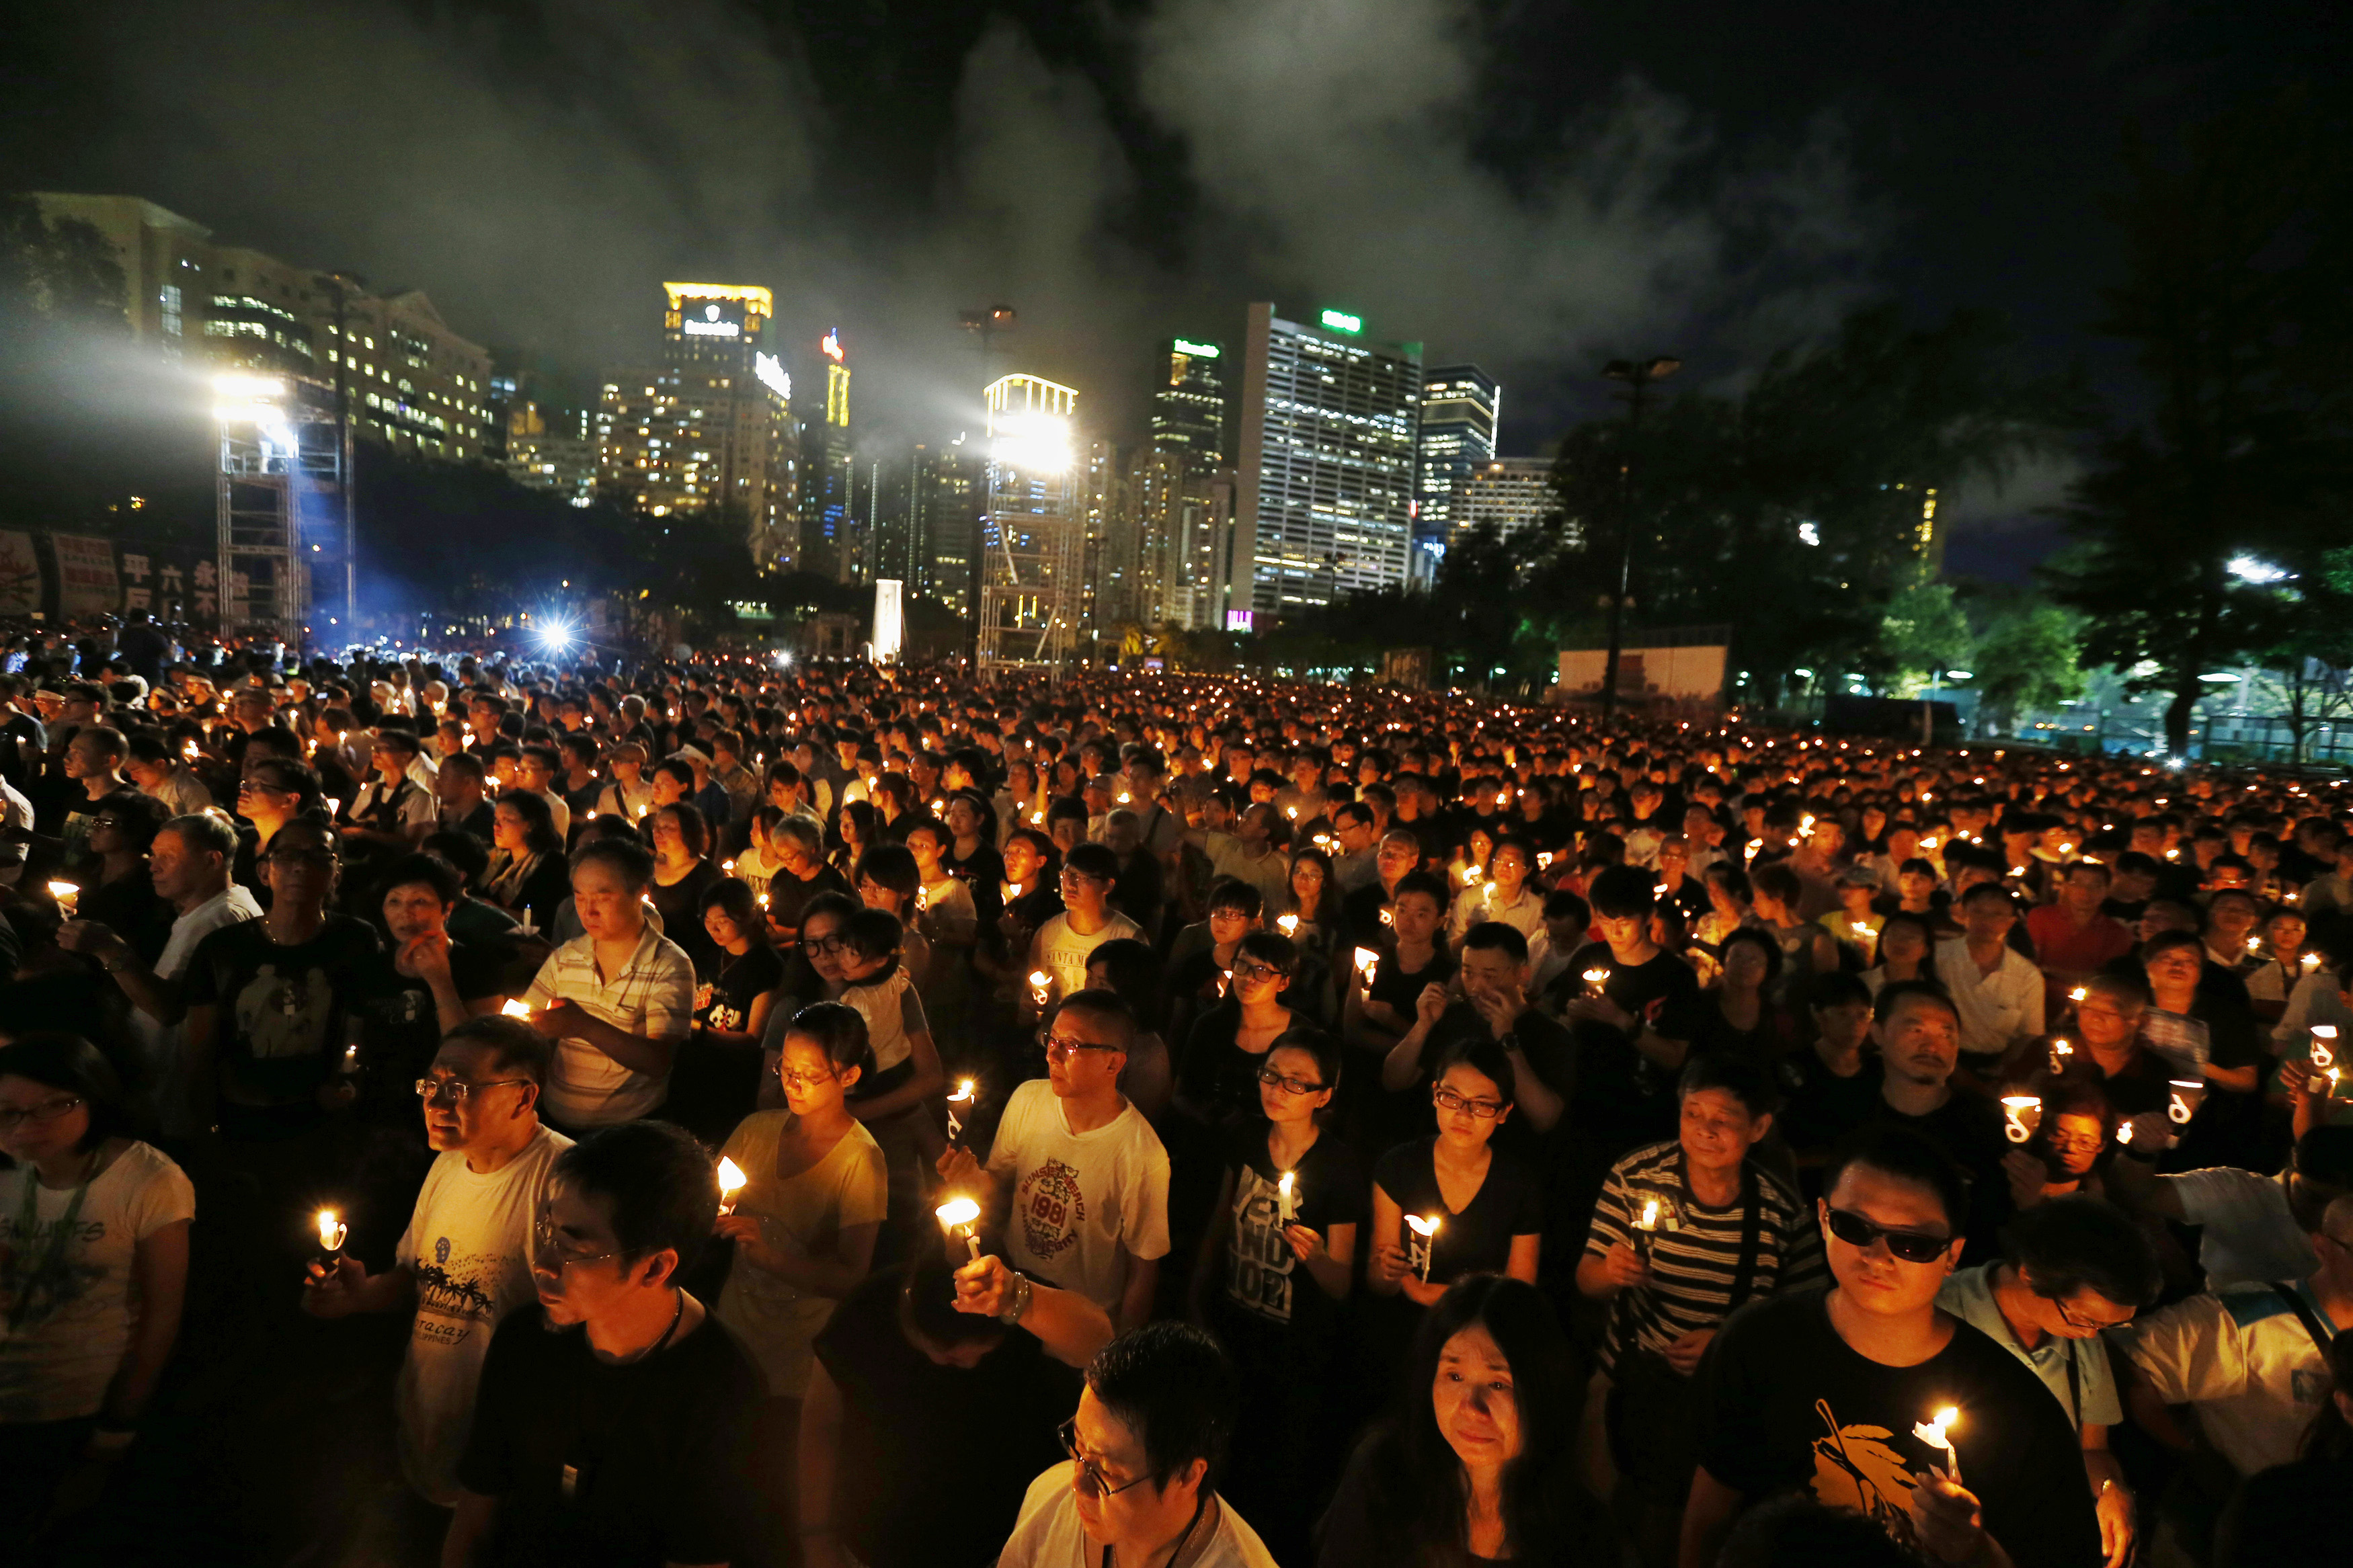 Tens of thousands of people take part in a candlelight vigil at Hong Kong's Victoria Park on 4 June 2014, to mark the 25th anniversary of the military crackdown in Beijing